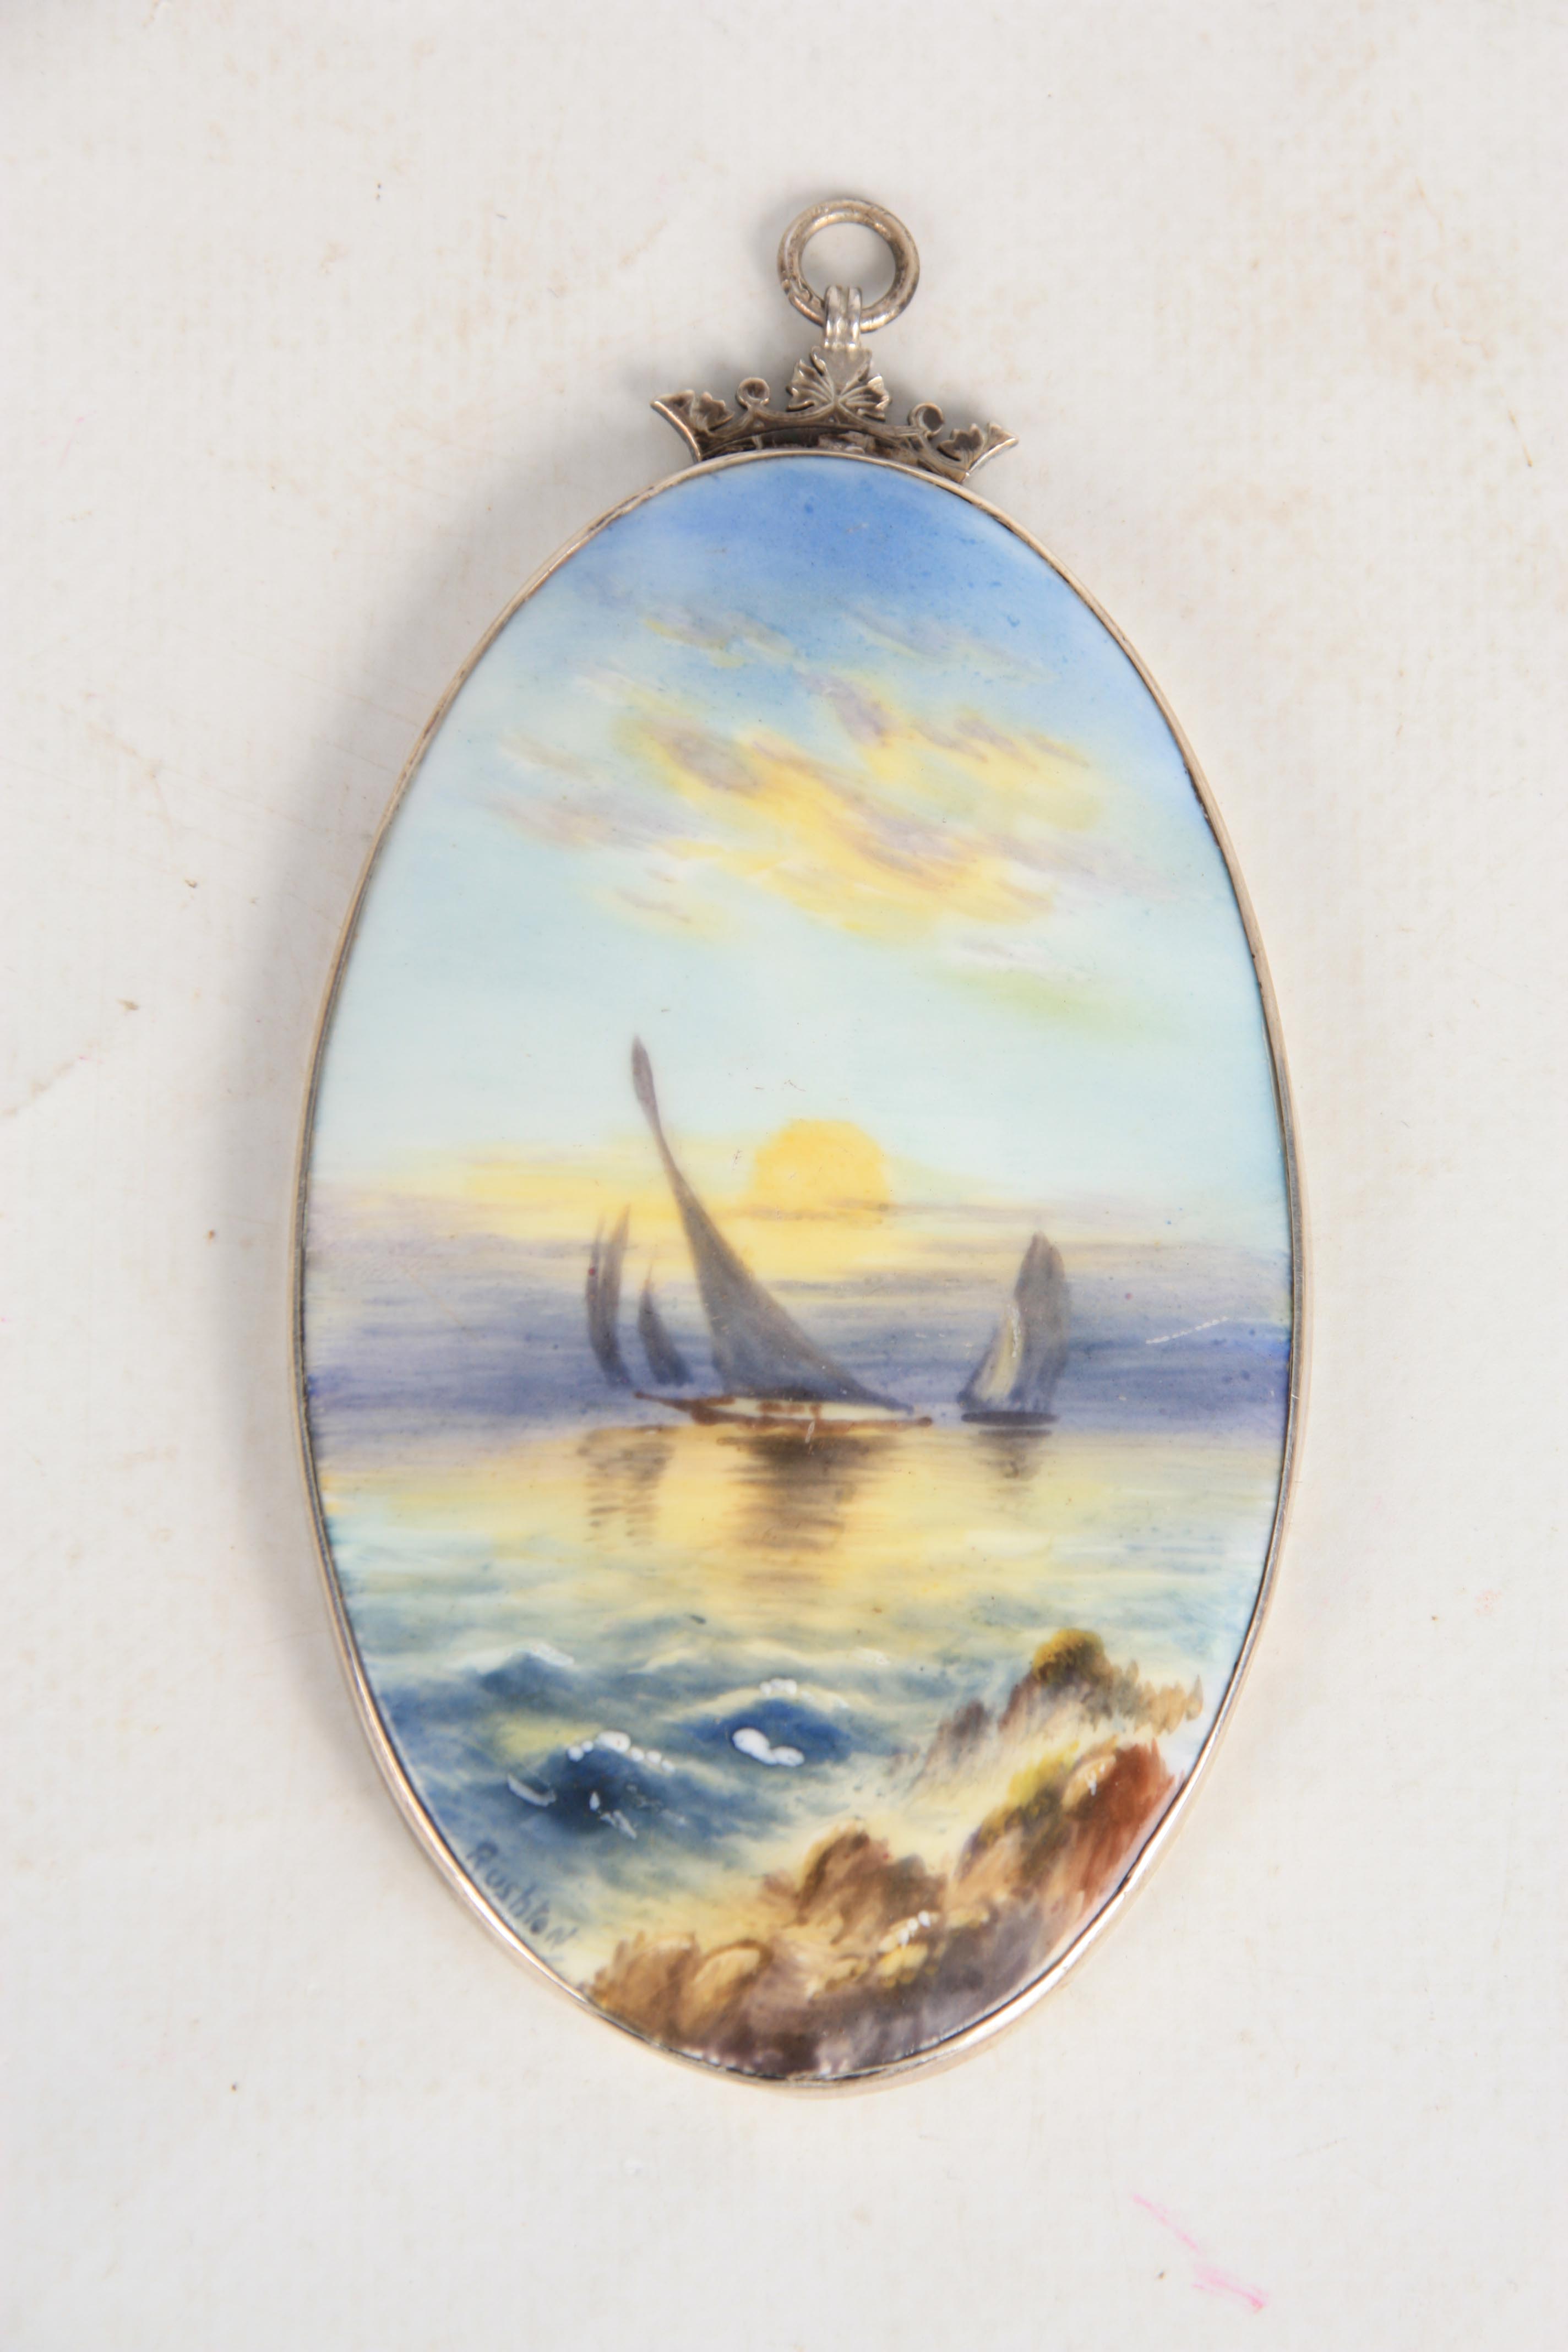 A SILVER FRAMED OVAL ROYAL WORCESTER PAINTED PORCELAIN PLAQUE BY RUSHTON depicting two sailboats - Image 3 of 5